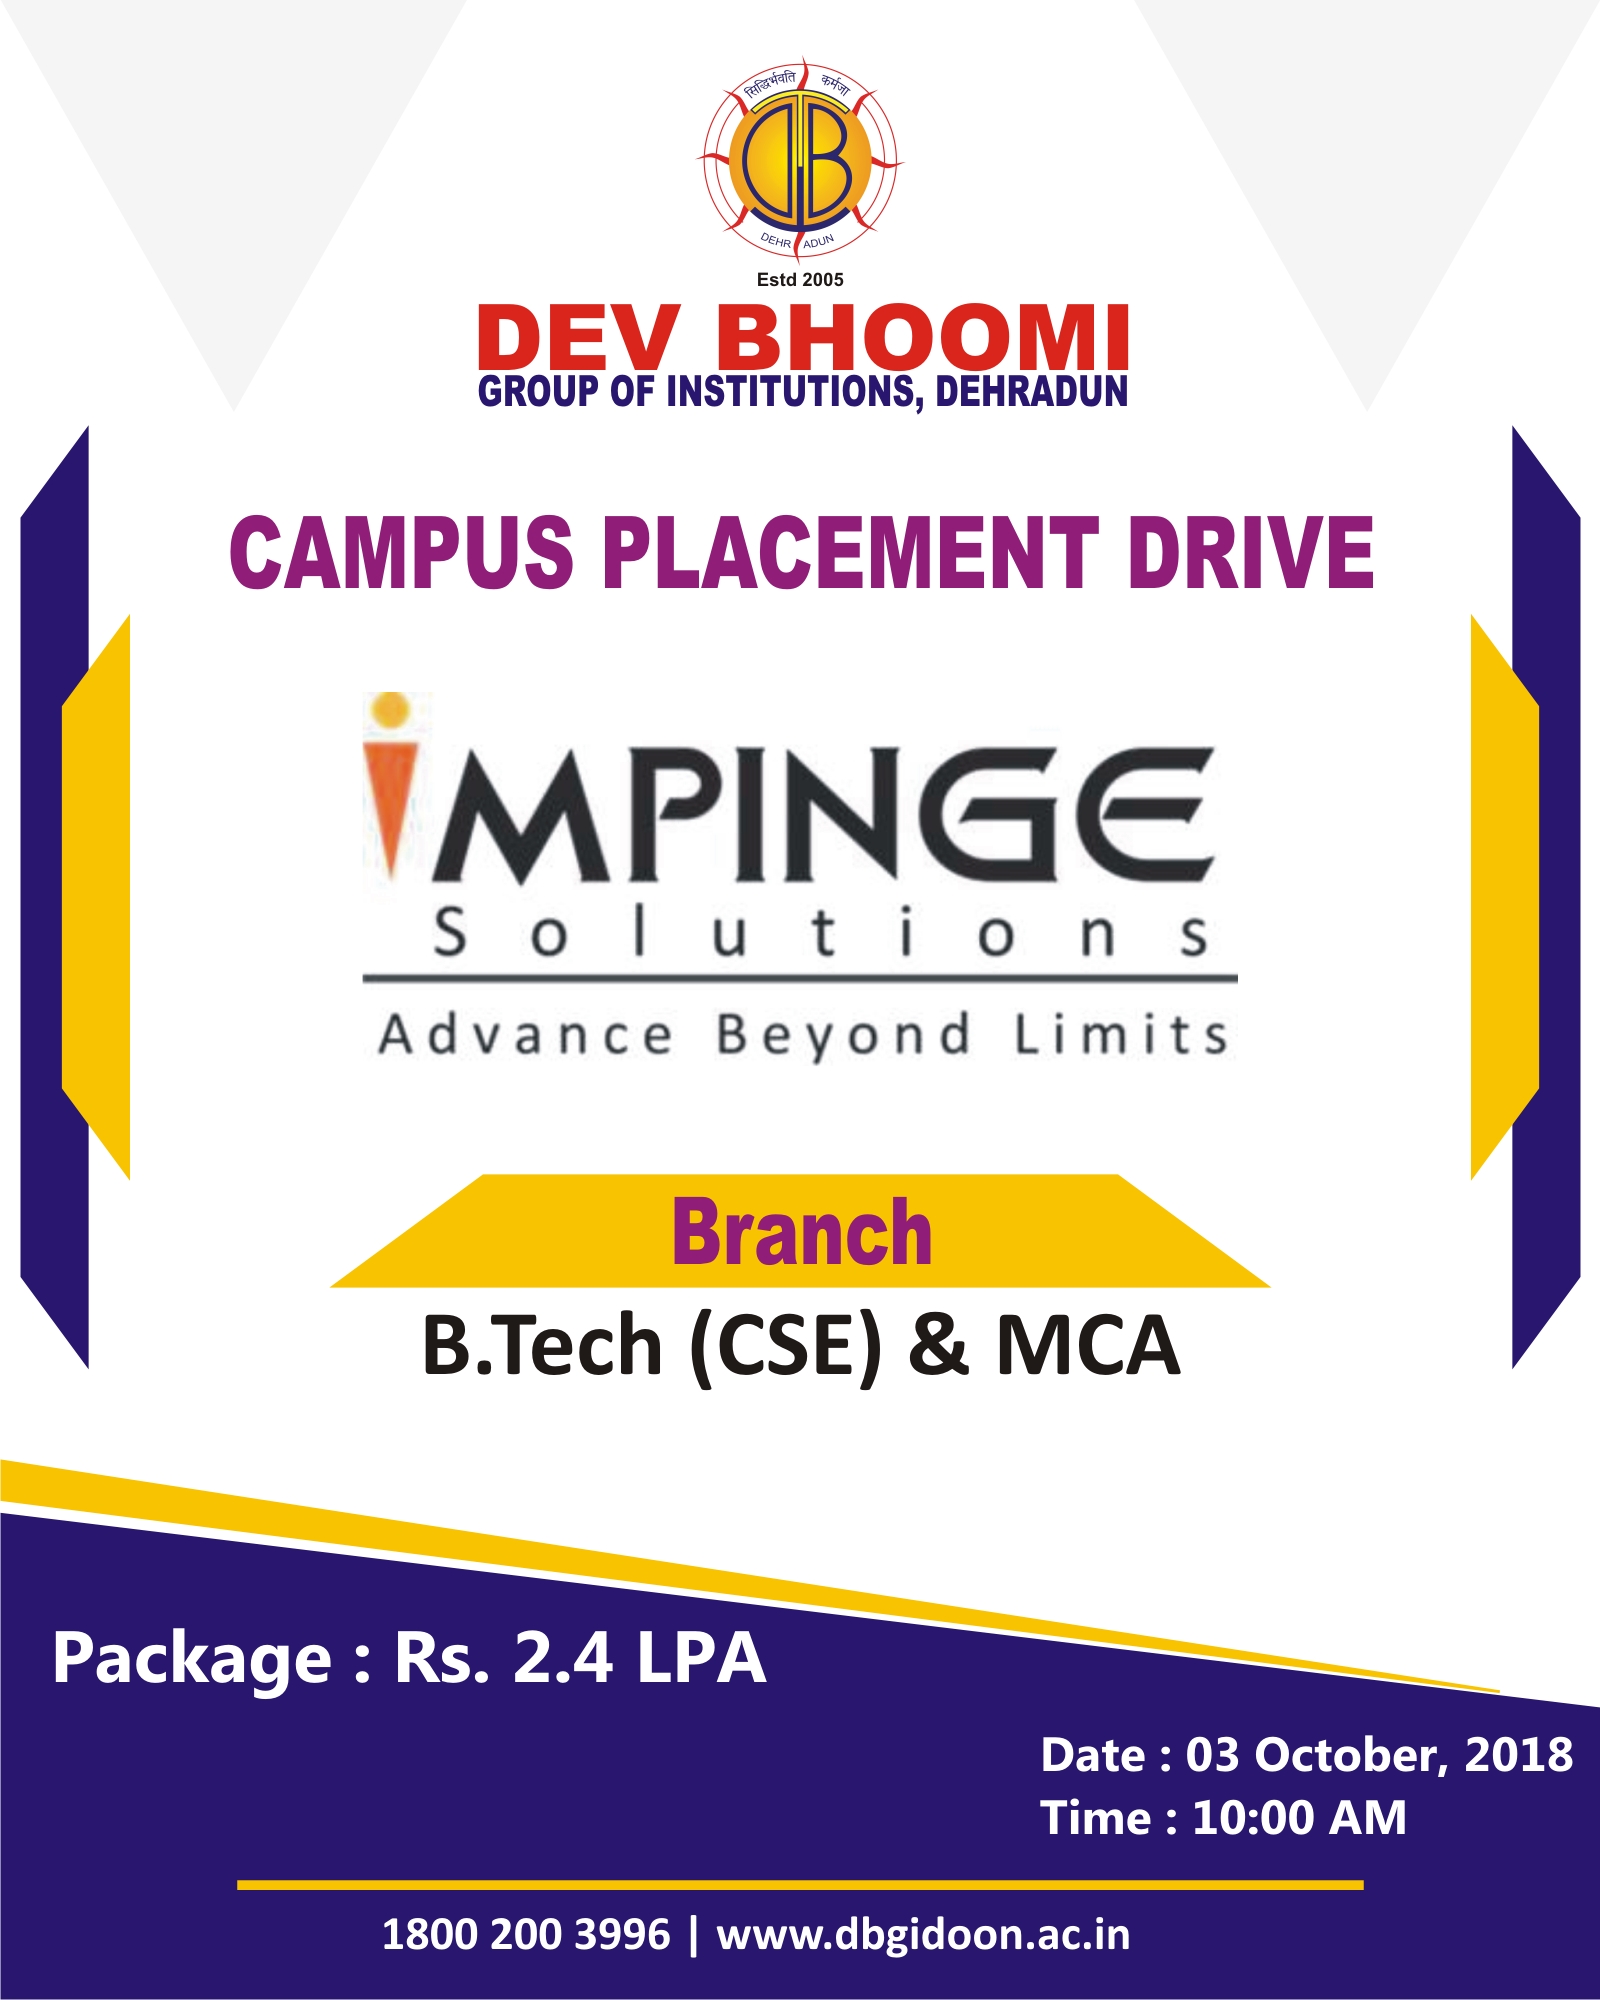 Photos- Campus Placement Drive of Impinge Solutions